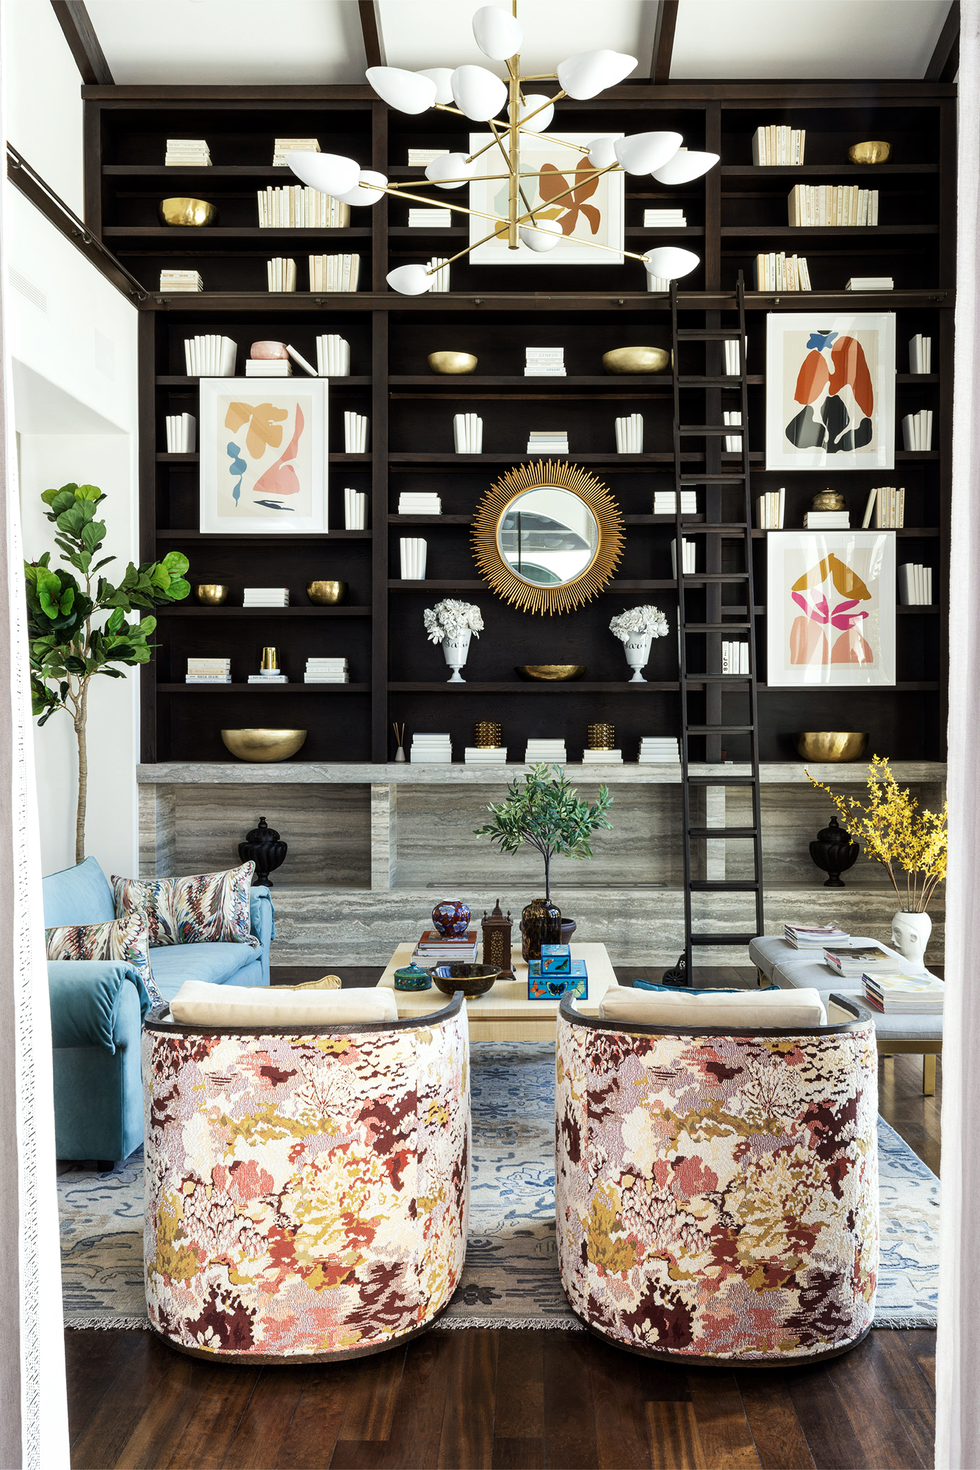 18 Gorgeous Reading Room Ideas We Want to Steal